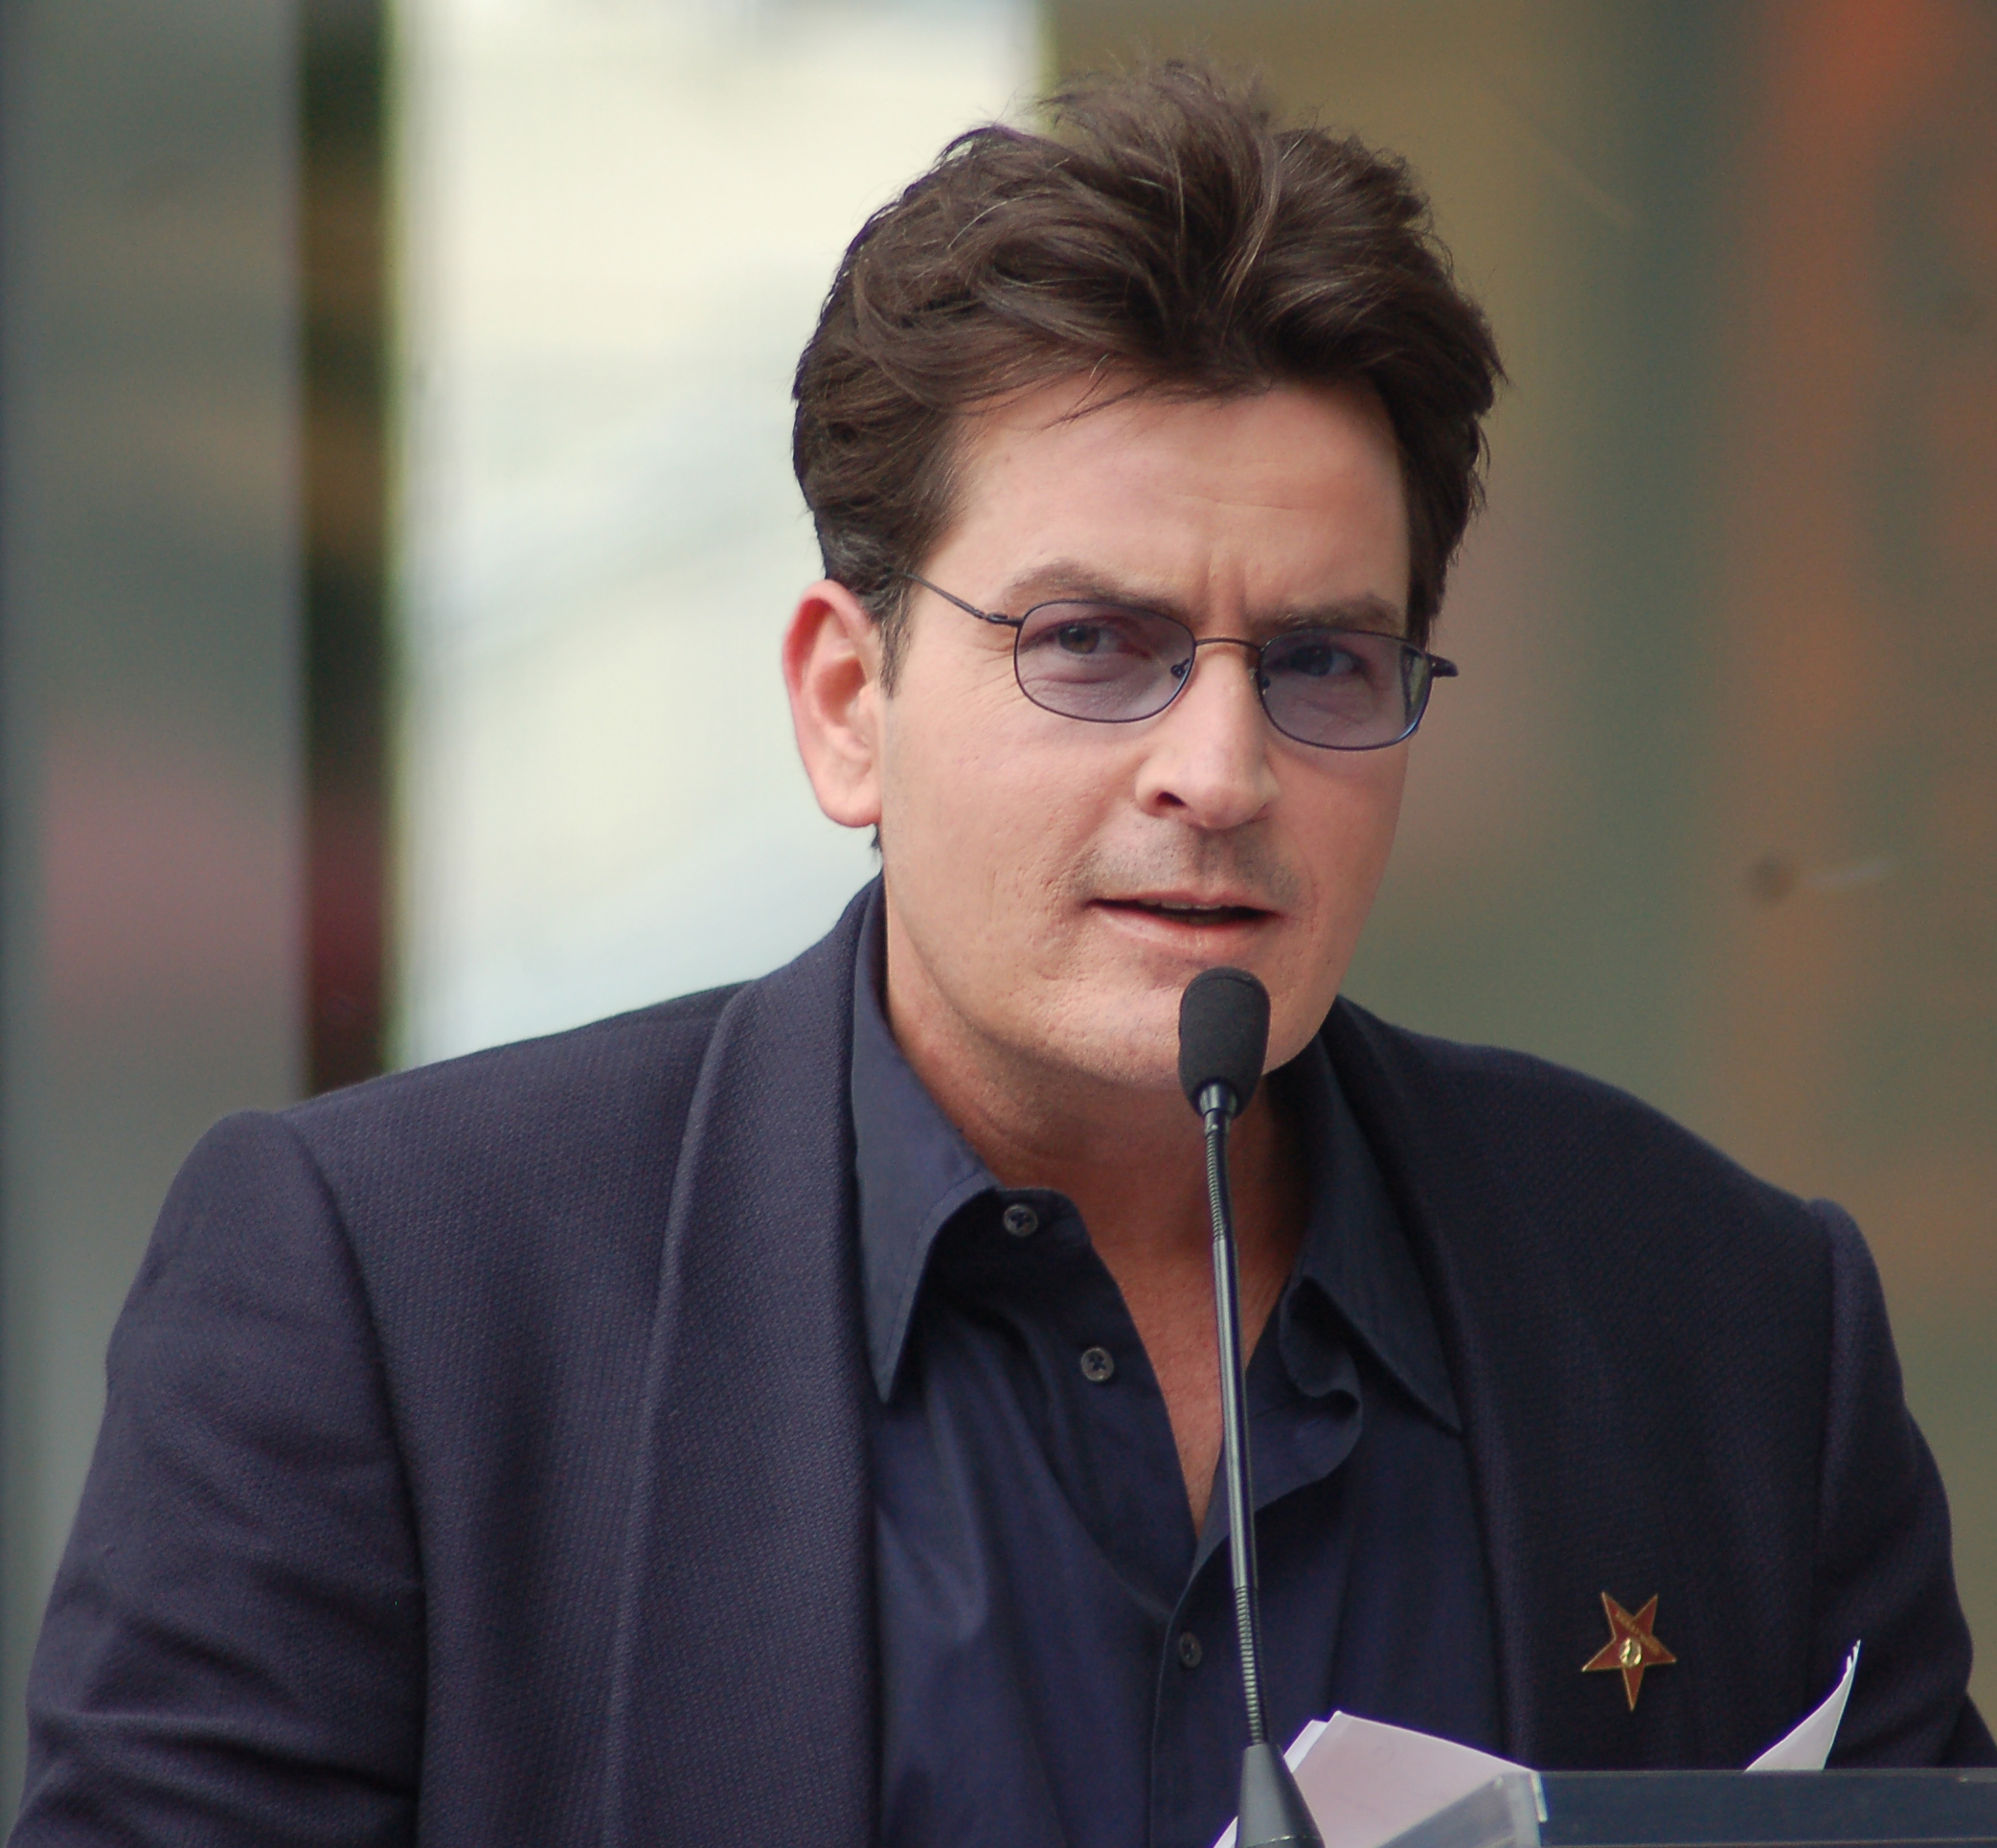 Charlie Sheen - 20 Celebrities with Criminal Records